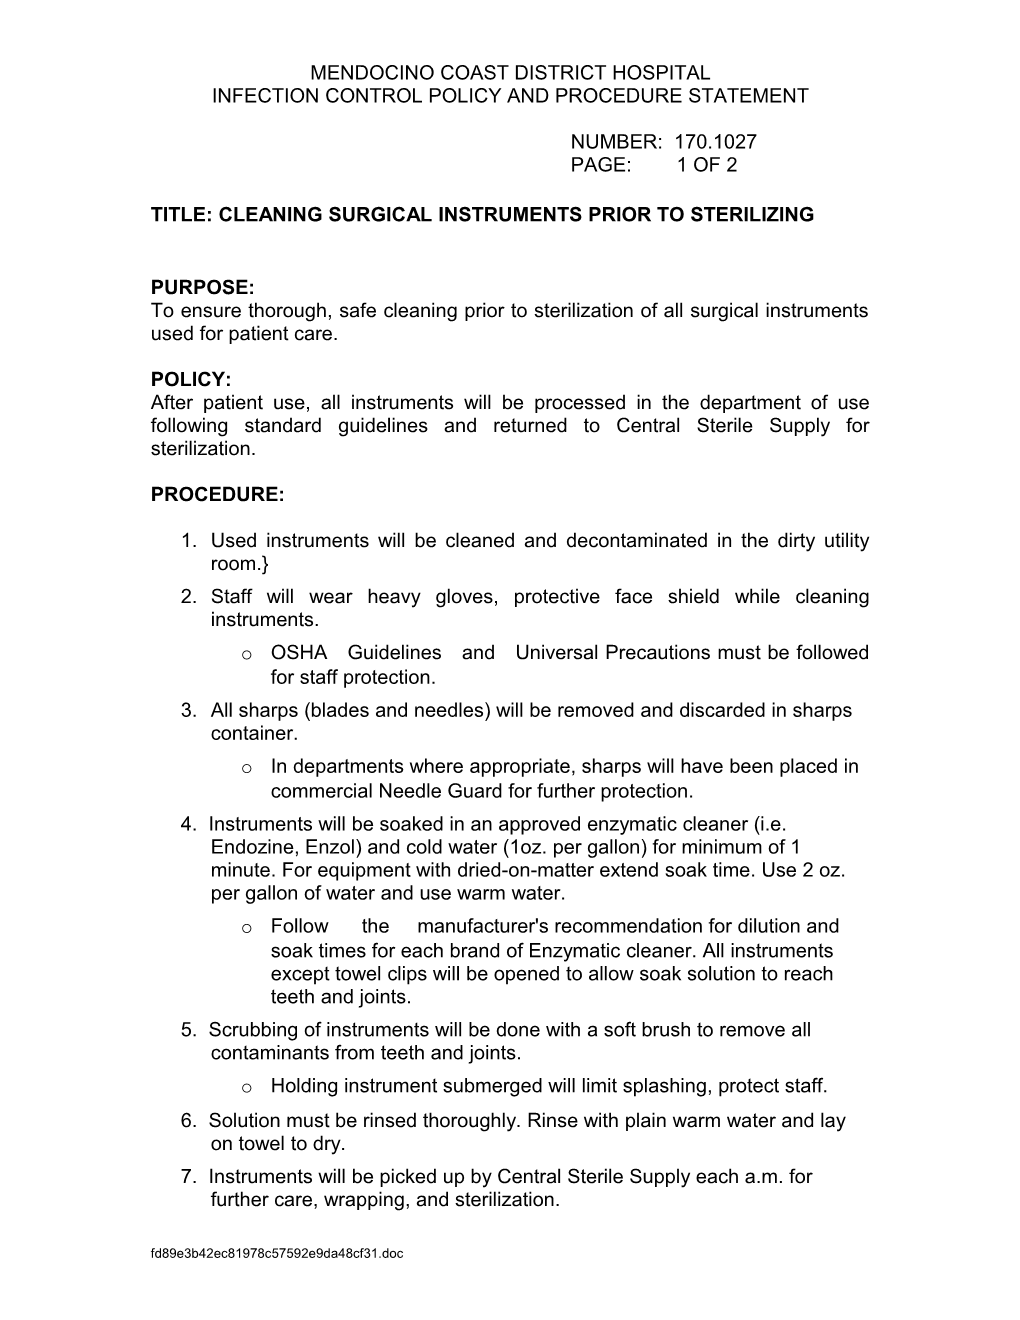 Infection Control Policy and Procedure Statement